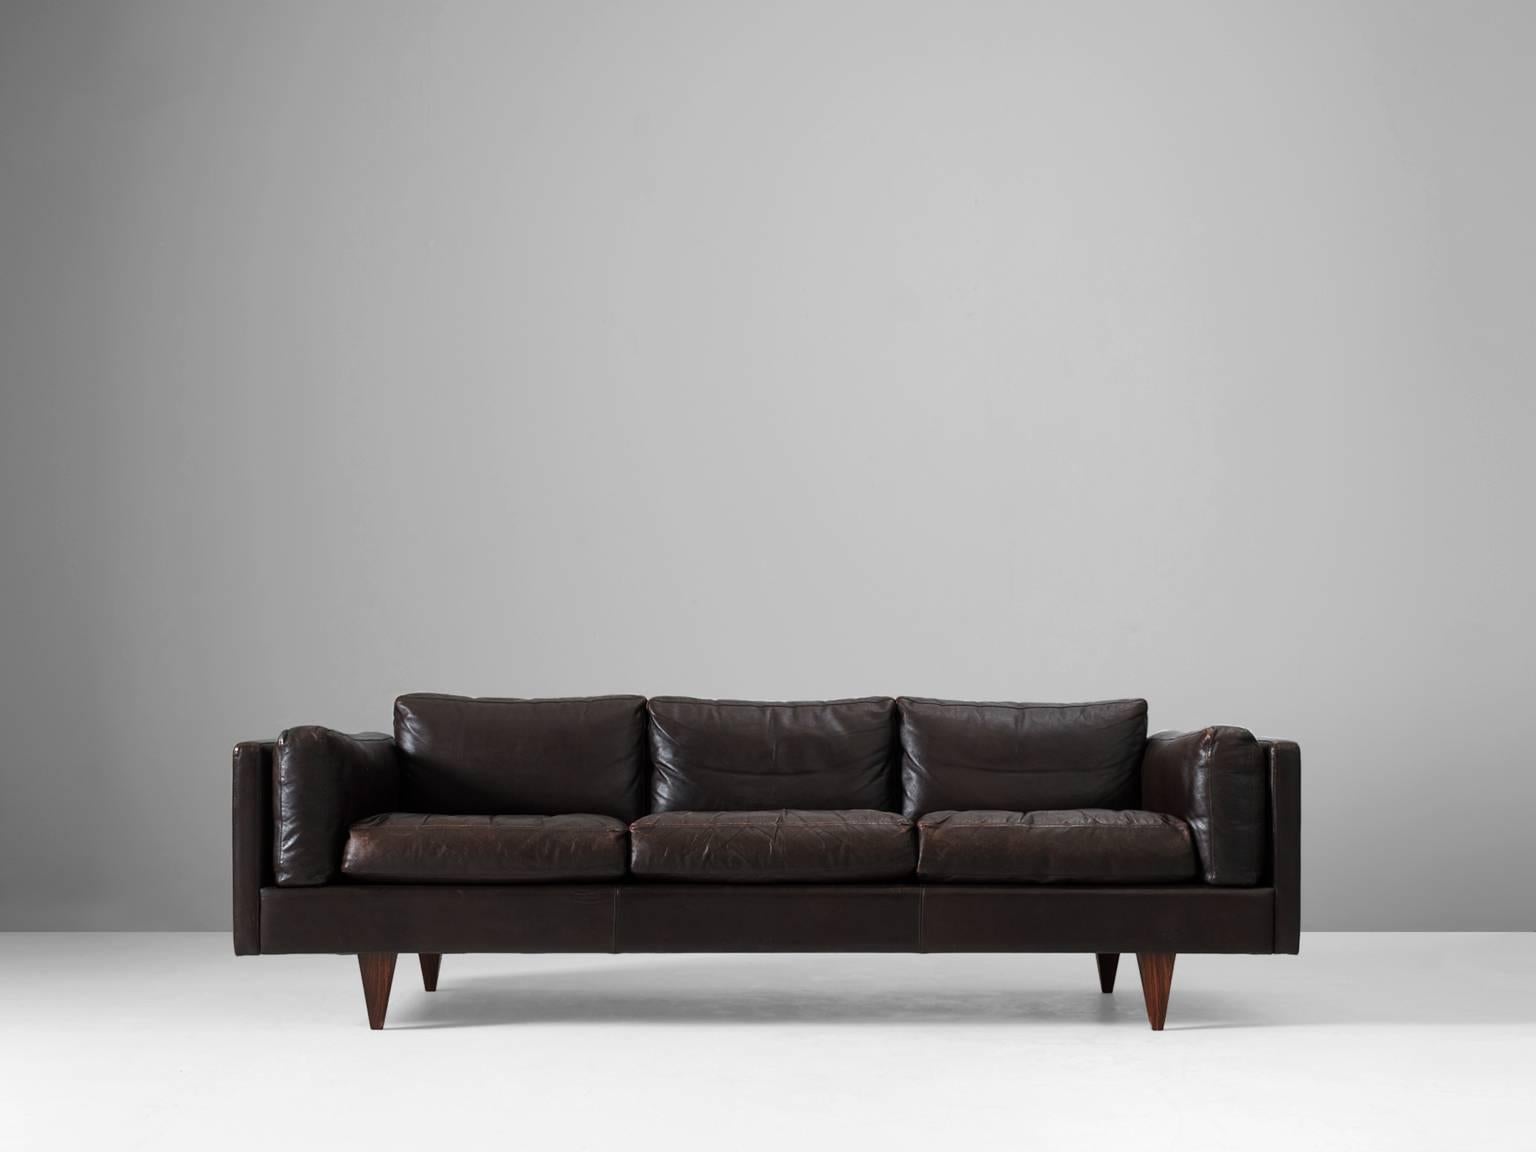 Three-seat sofa, brown leather and wood by Illum Wikkelsø, Denmark, 1960s.

This sofa is one of the best Mid-Century designs to be found in Denmark. It shows great craftsmanship and is in a wonderful condition. Due to the luxurious down filled